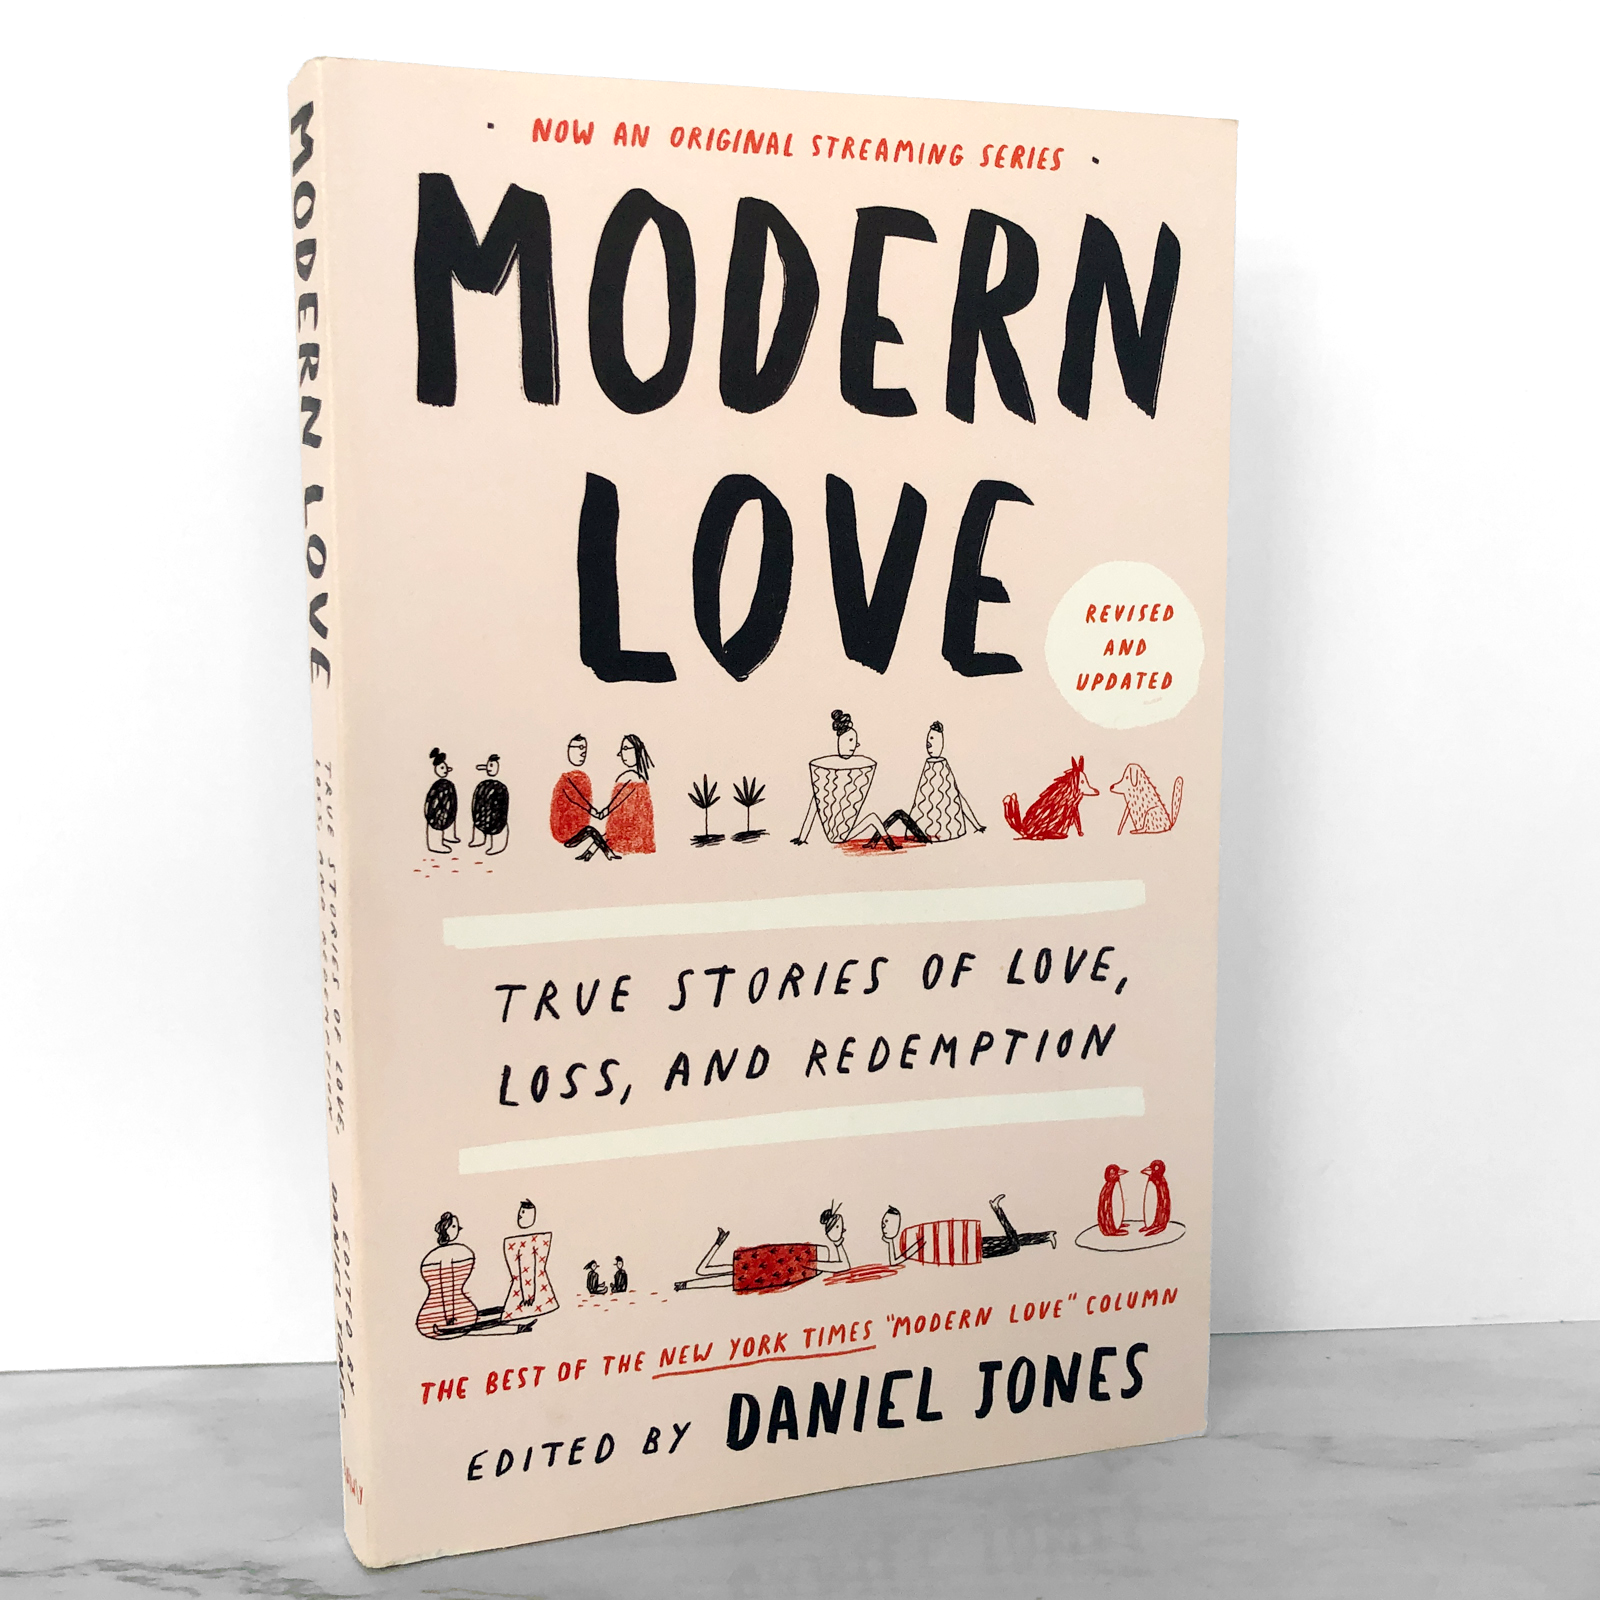 Modern Love: True Stories of Love, Loss & Redemption edited by